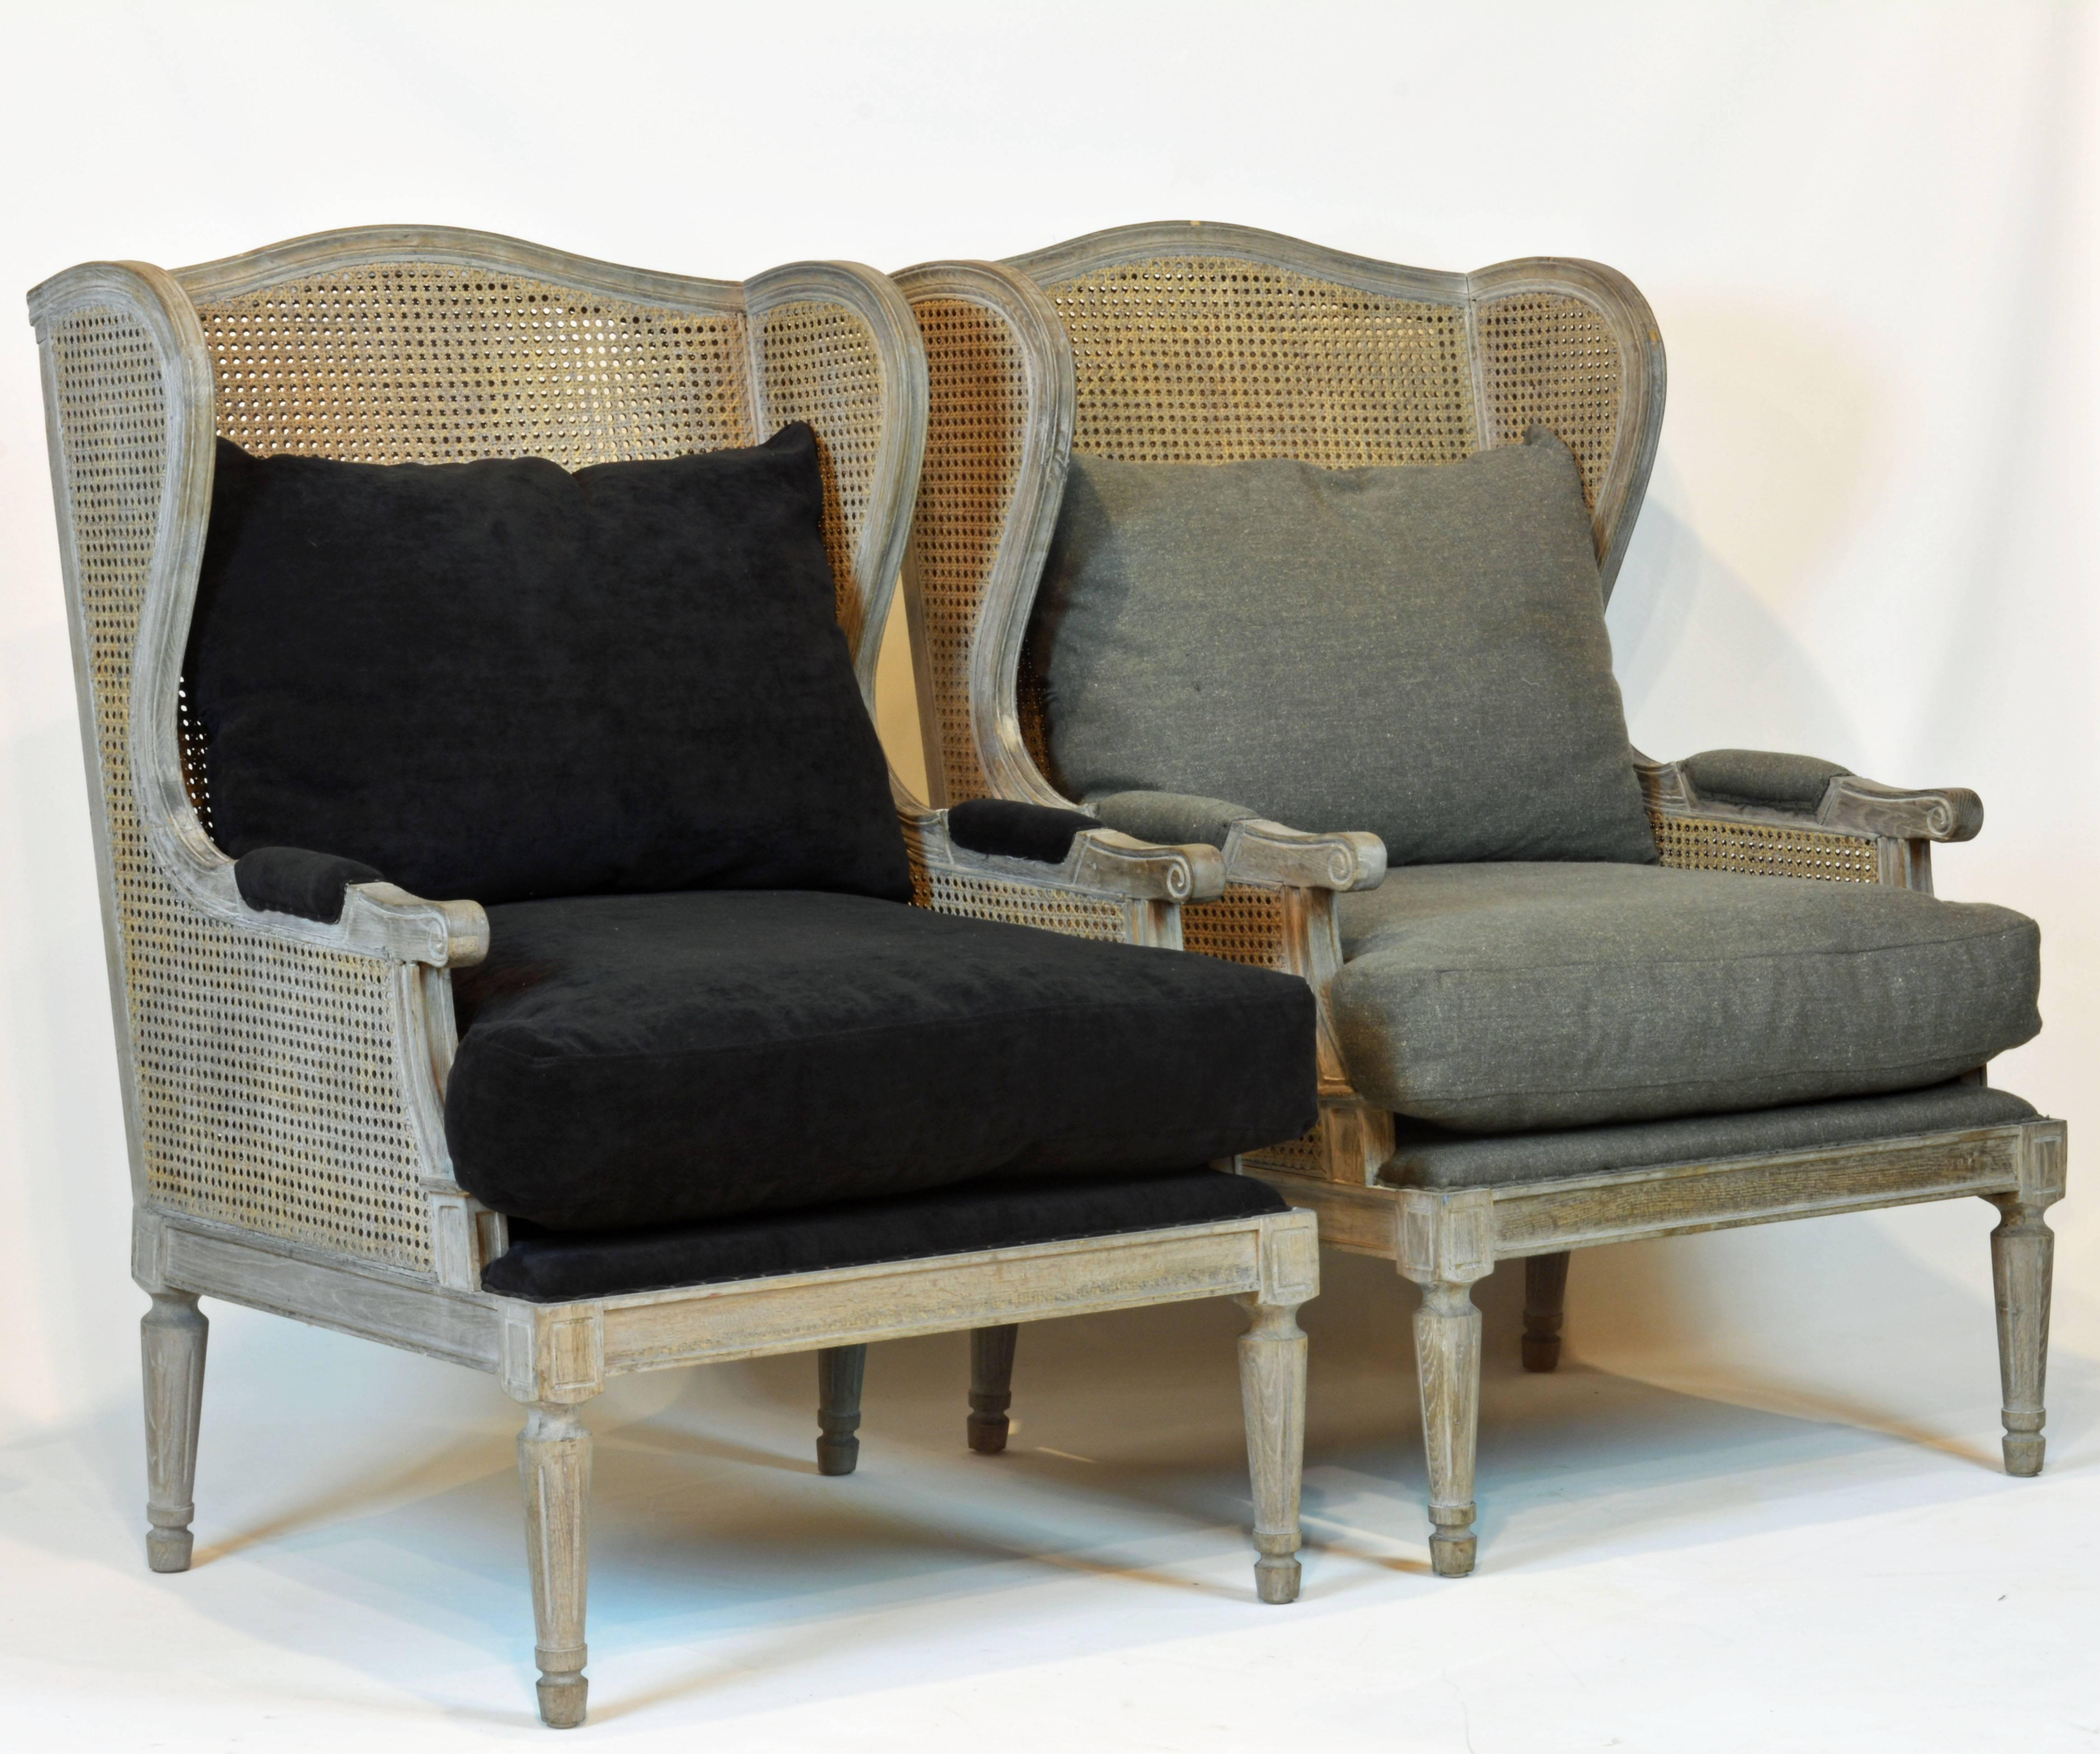 Cushioned one in black and the other in grey fabric, these chairs finished in a Puritan grey make an inviting and individualized impression. Wide and comfortable the construction features double cane walls and simplified Louis XVI design details